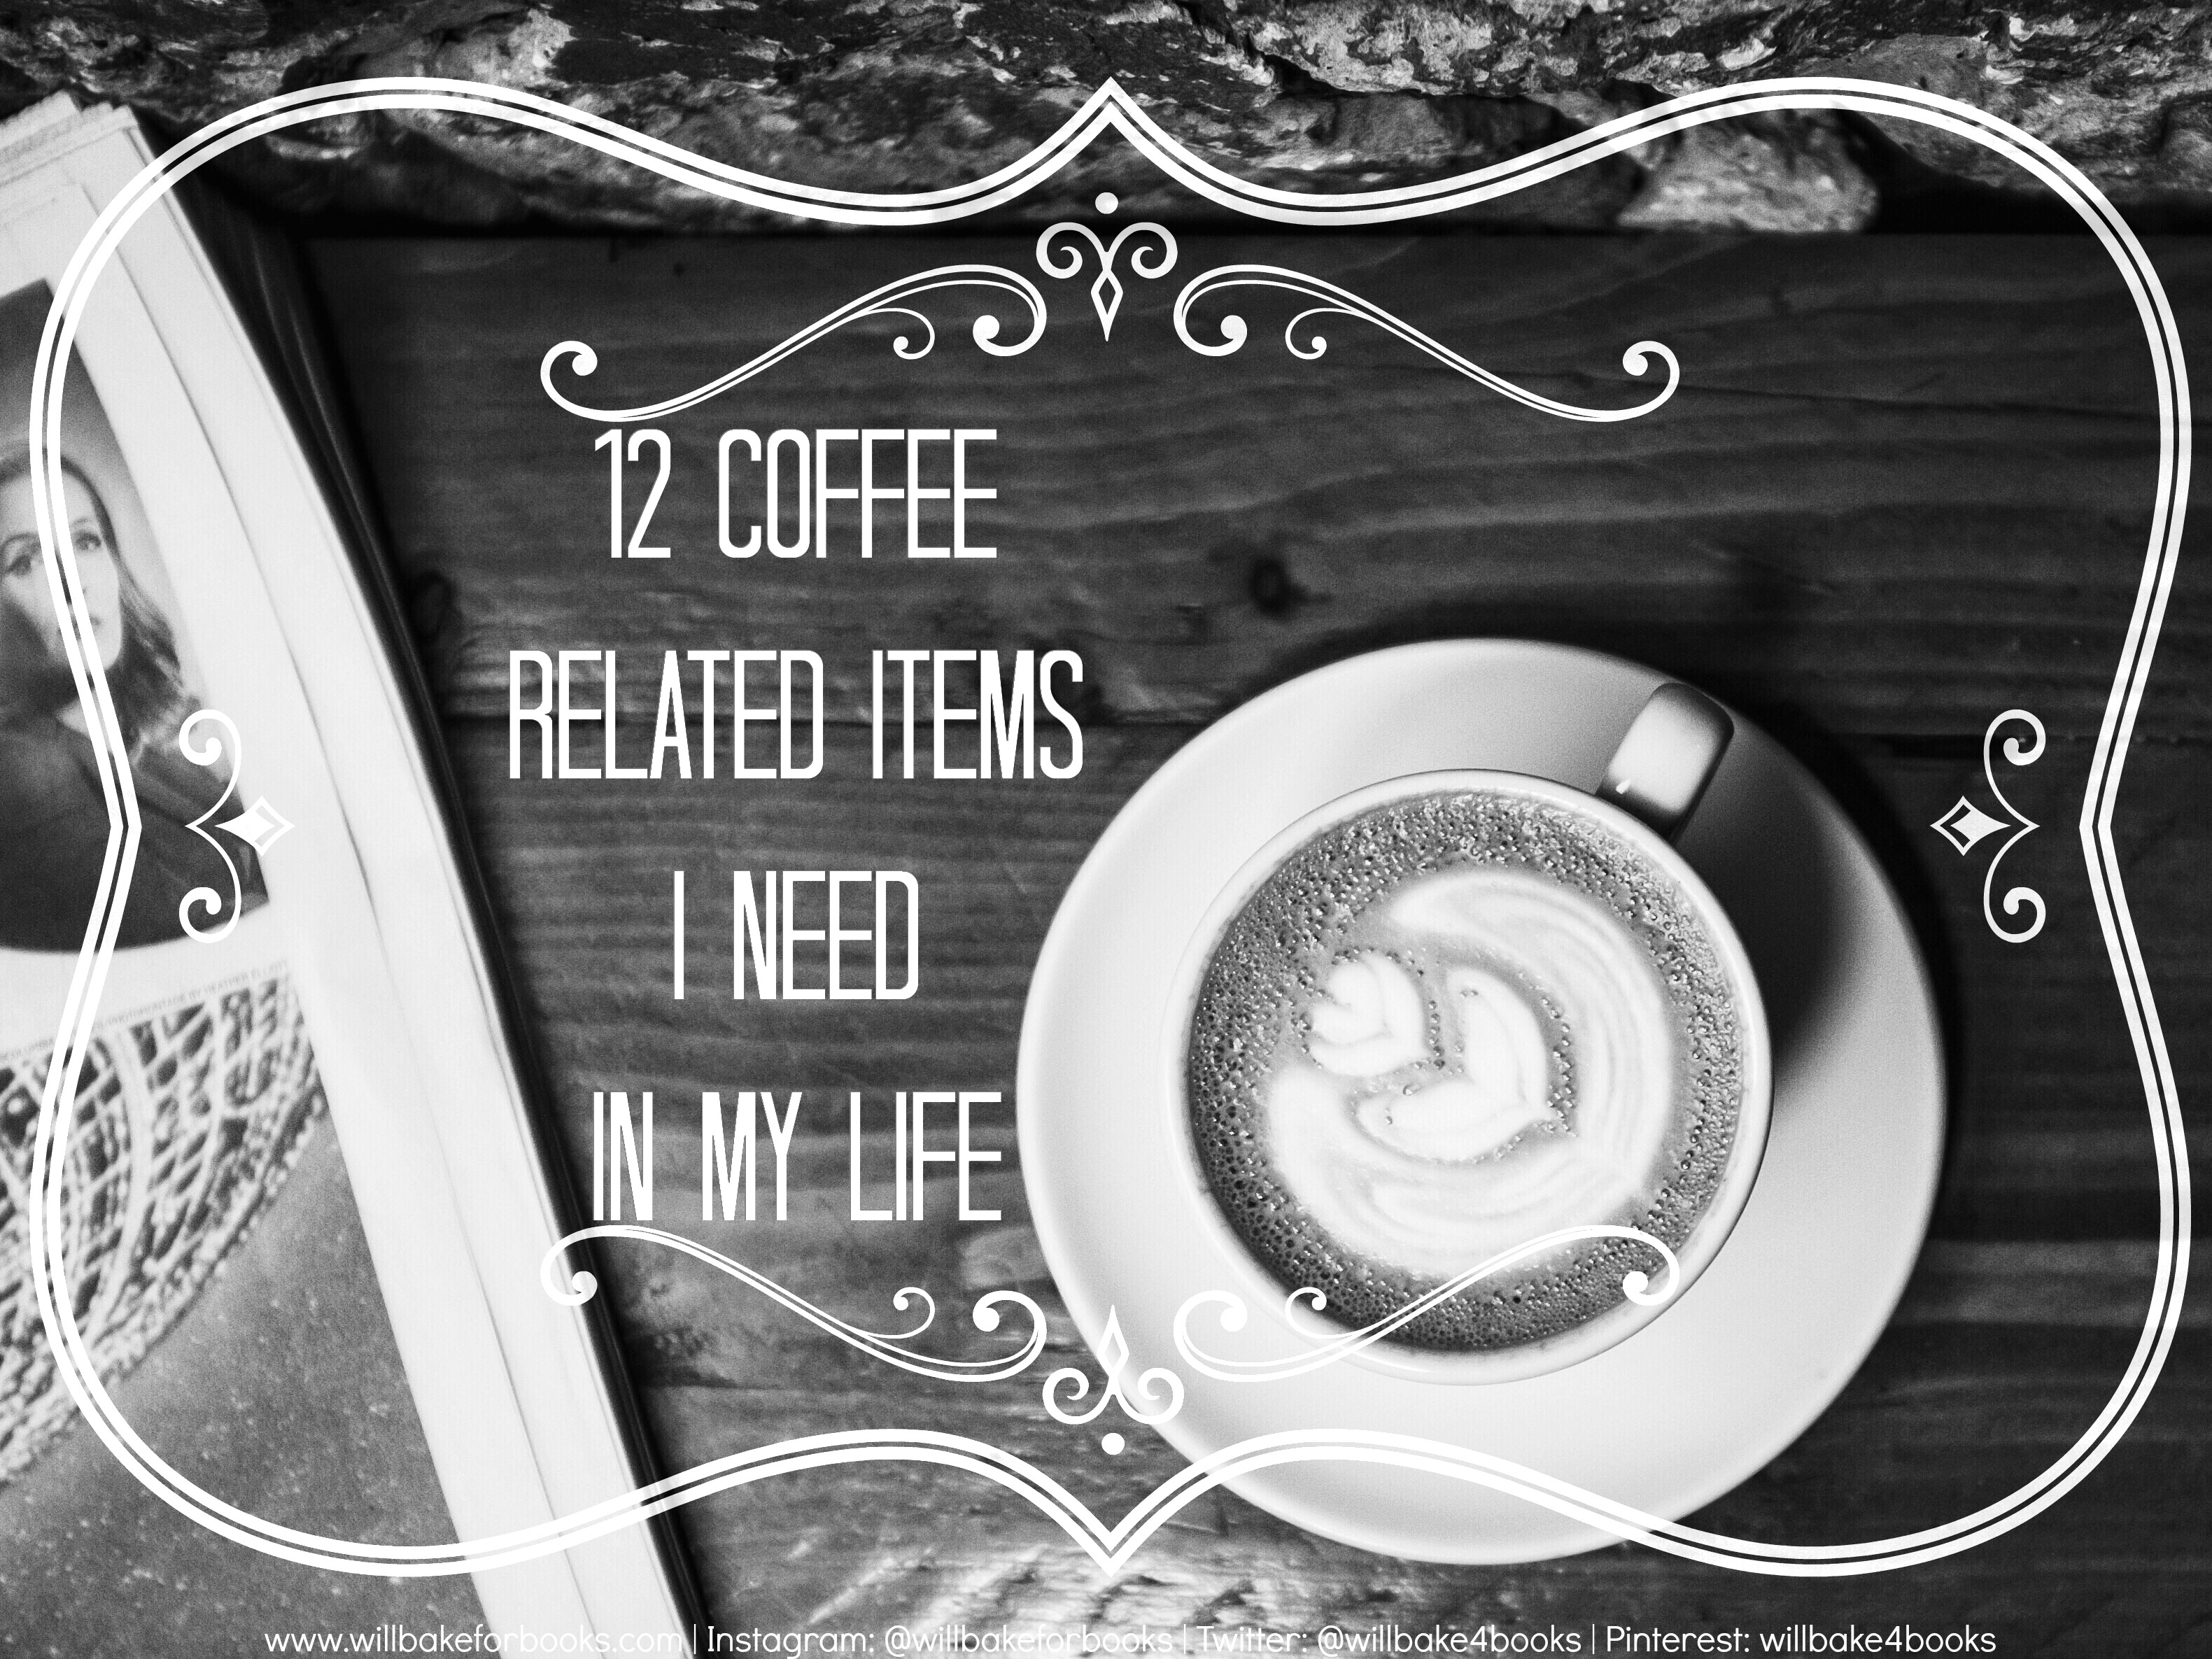 12 Coffee Related Items I Need in My Life | www.willbakeforbooks.com